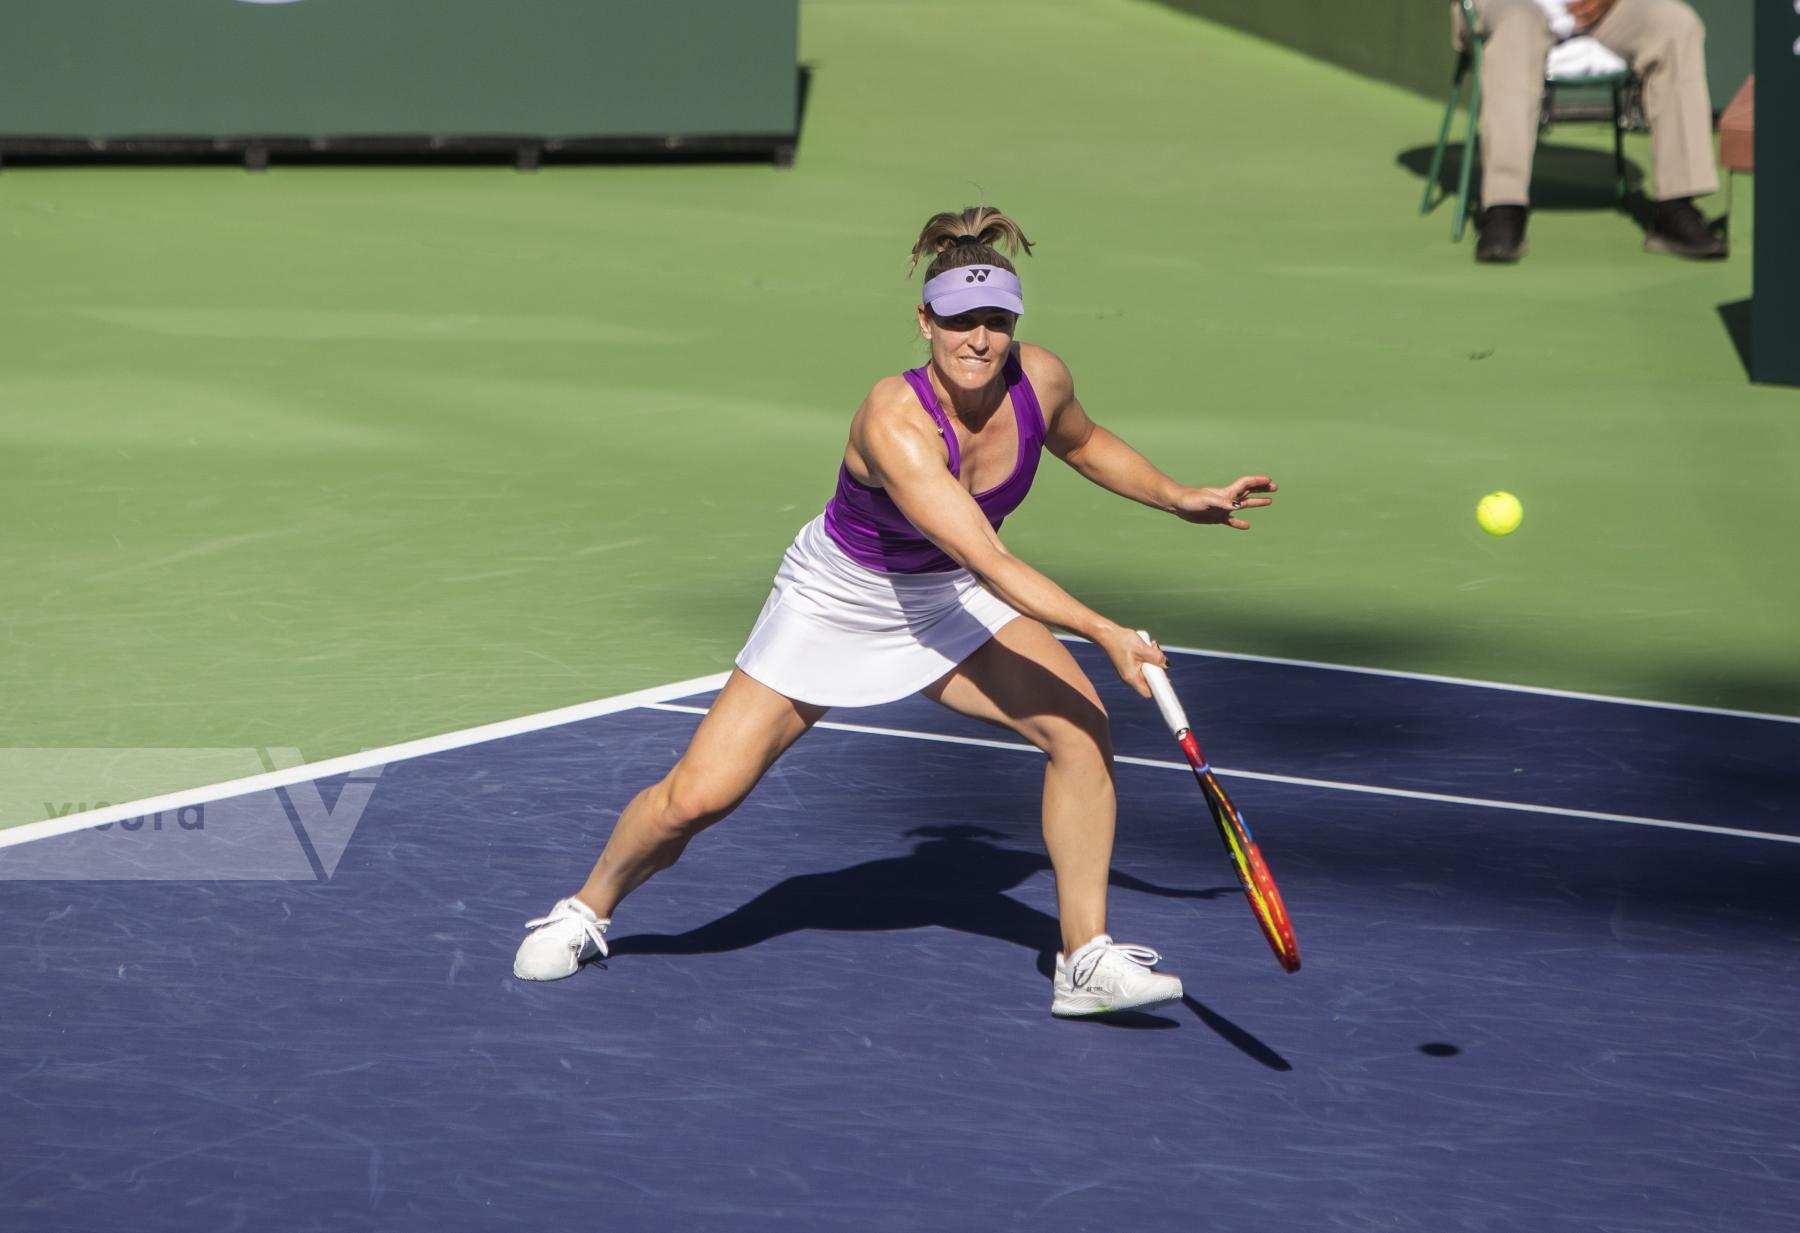 Purchase Dabrowski Competes at BNP Paribas Open by Katie Linsky Shaw